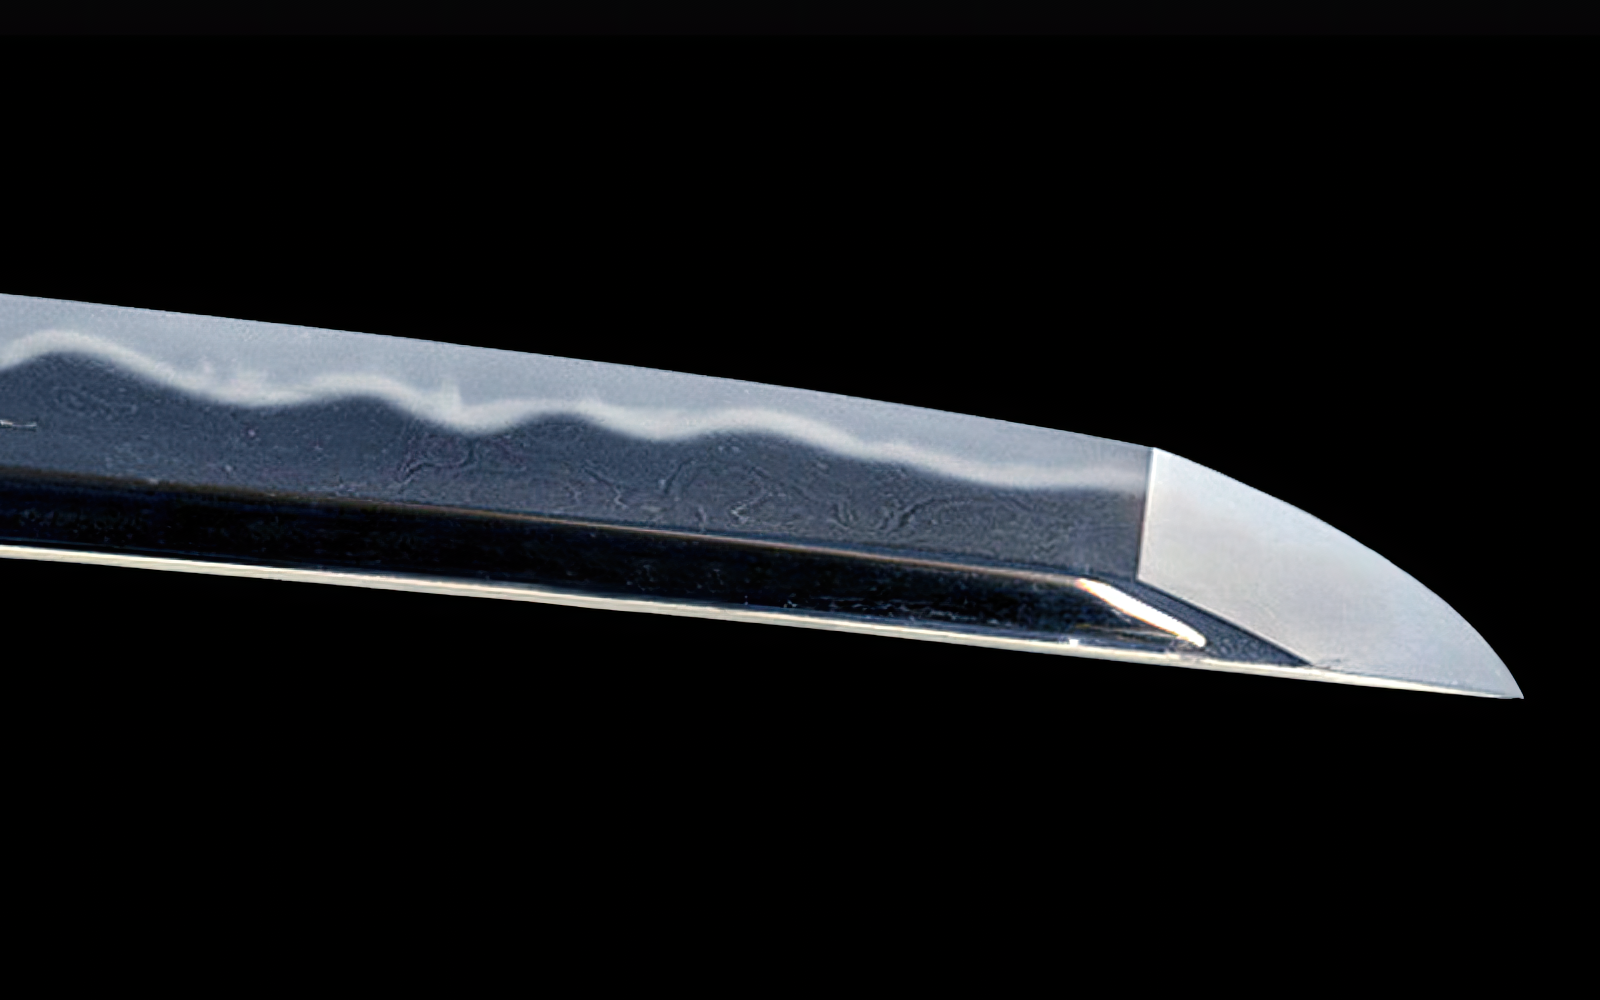 Hi Explained: Parts and Function of Grooves in Japanese Blades